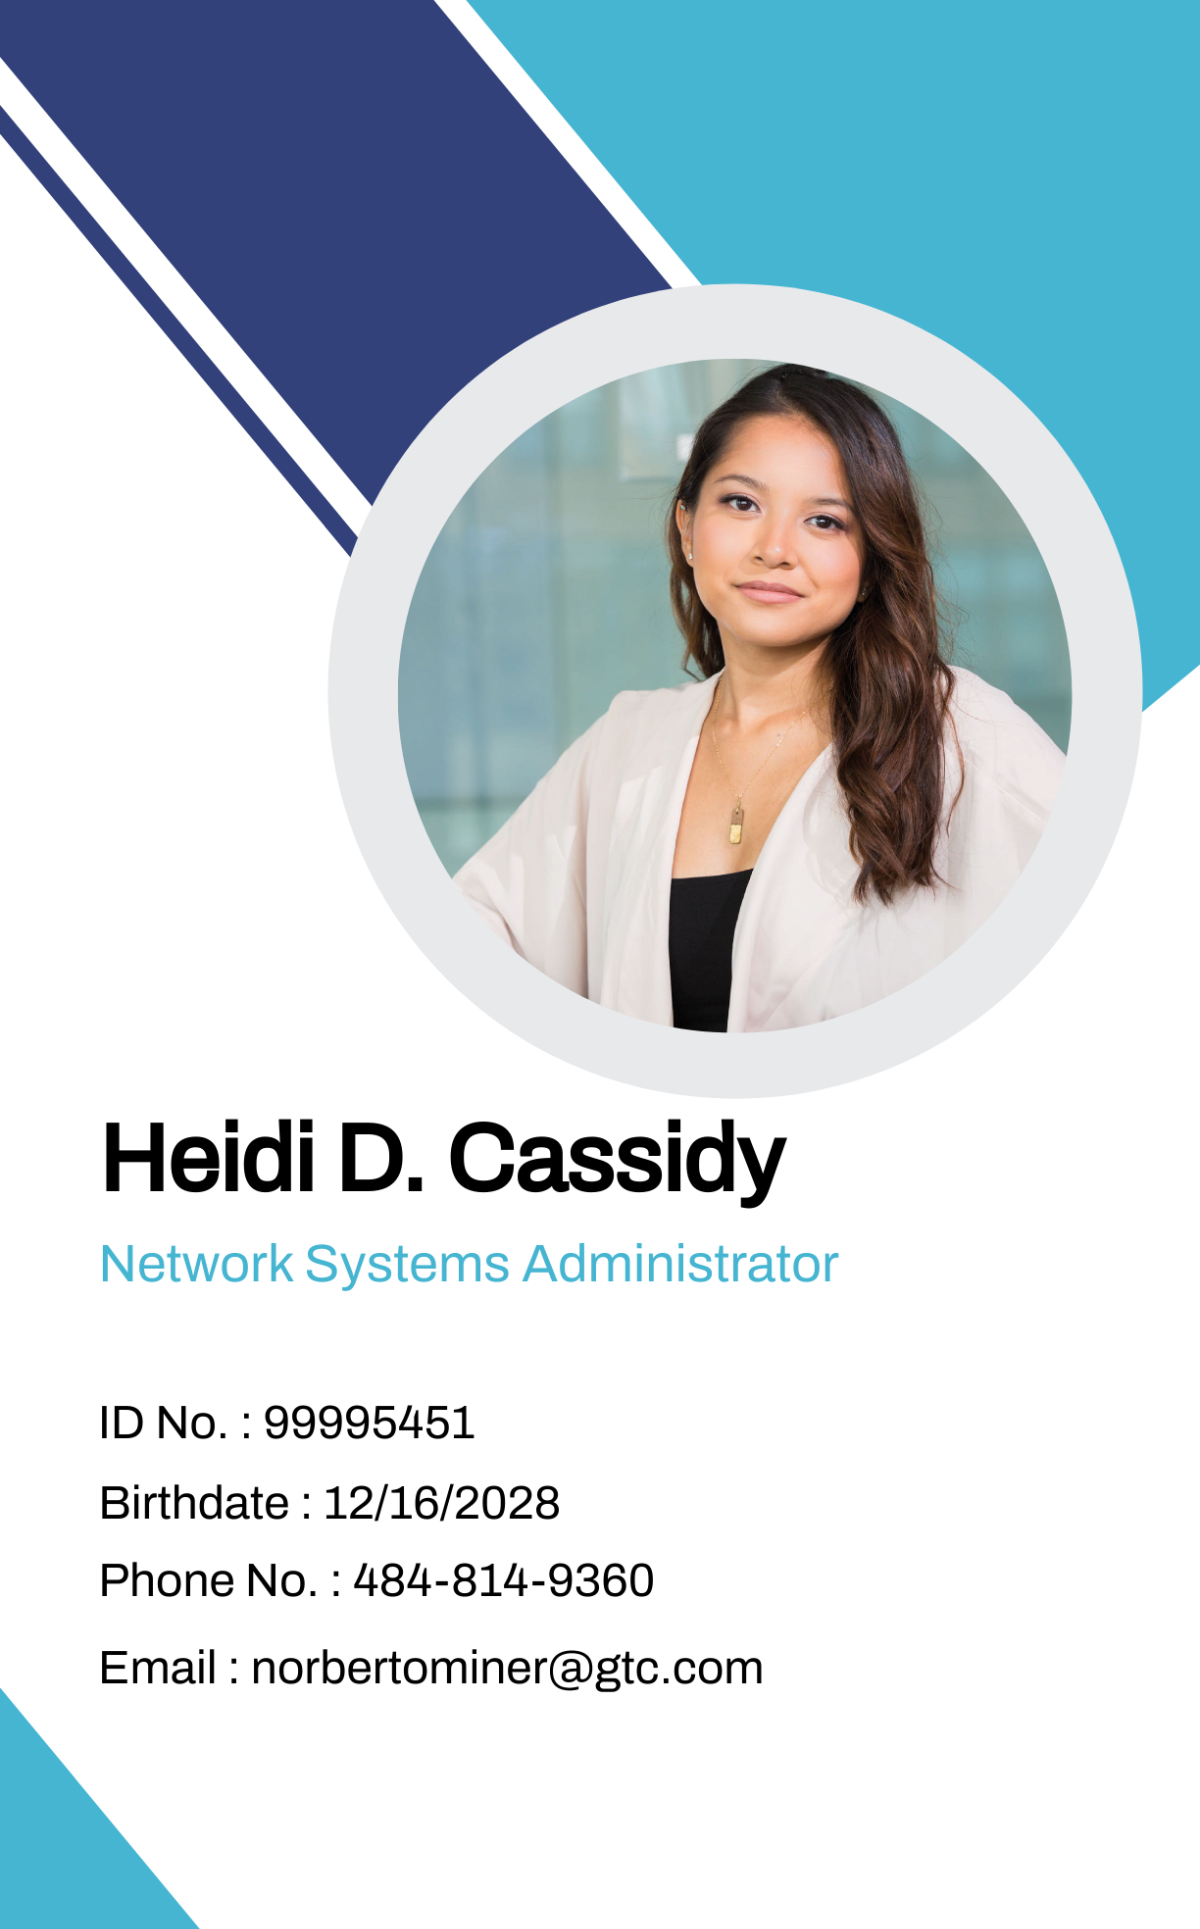 IT Services Company ID Card Template